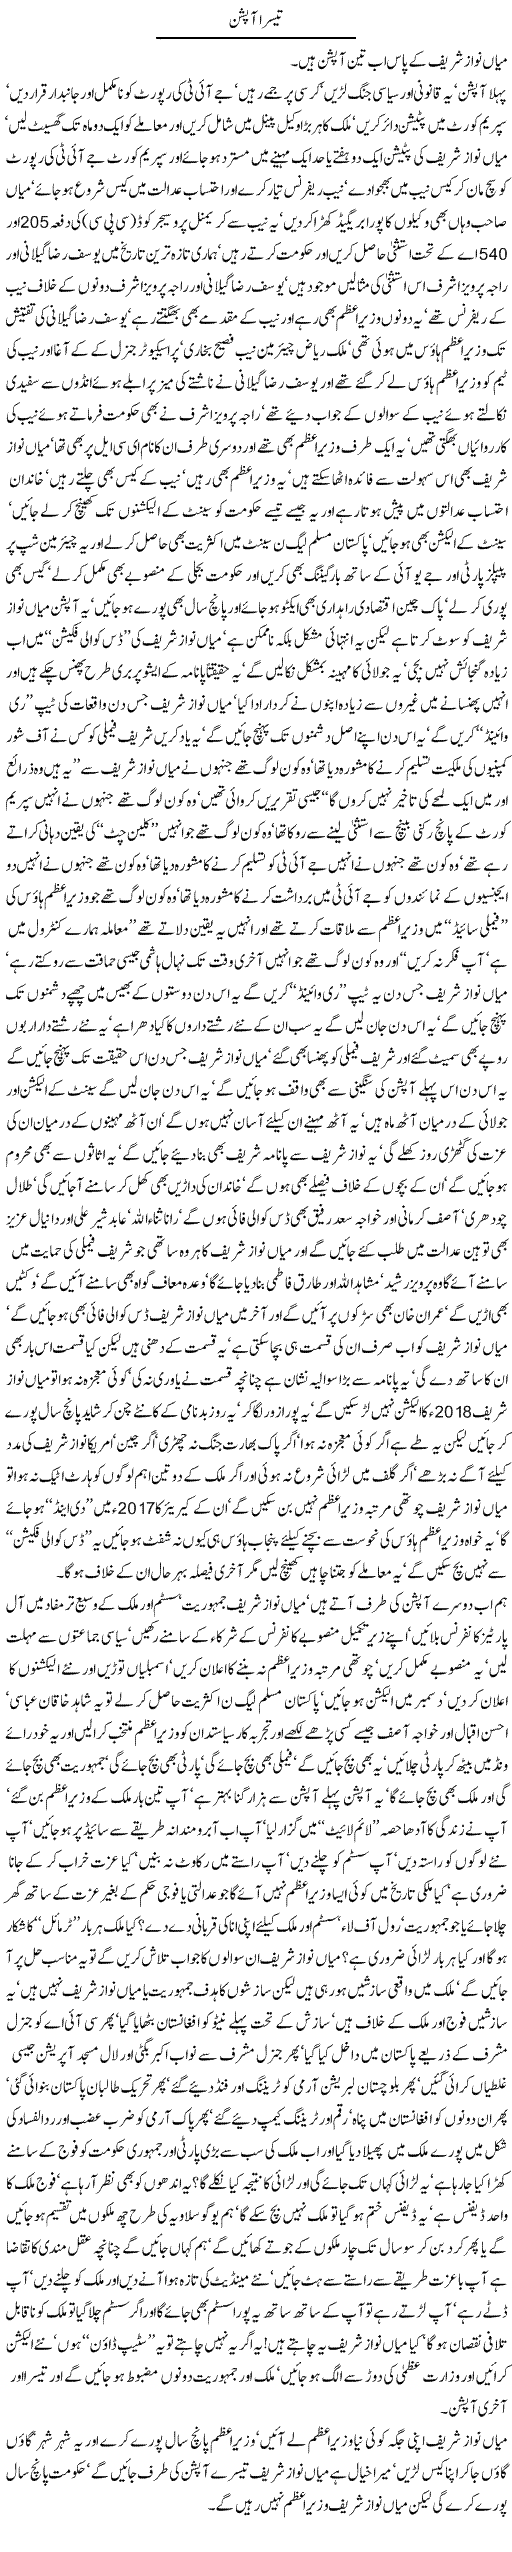 Teesra Option By Javed Chaudhry